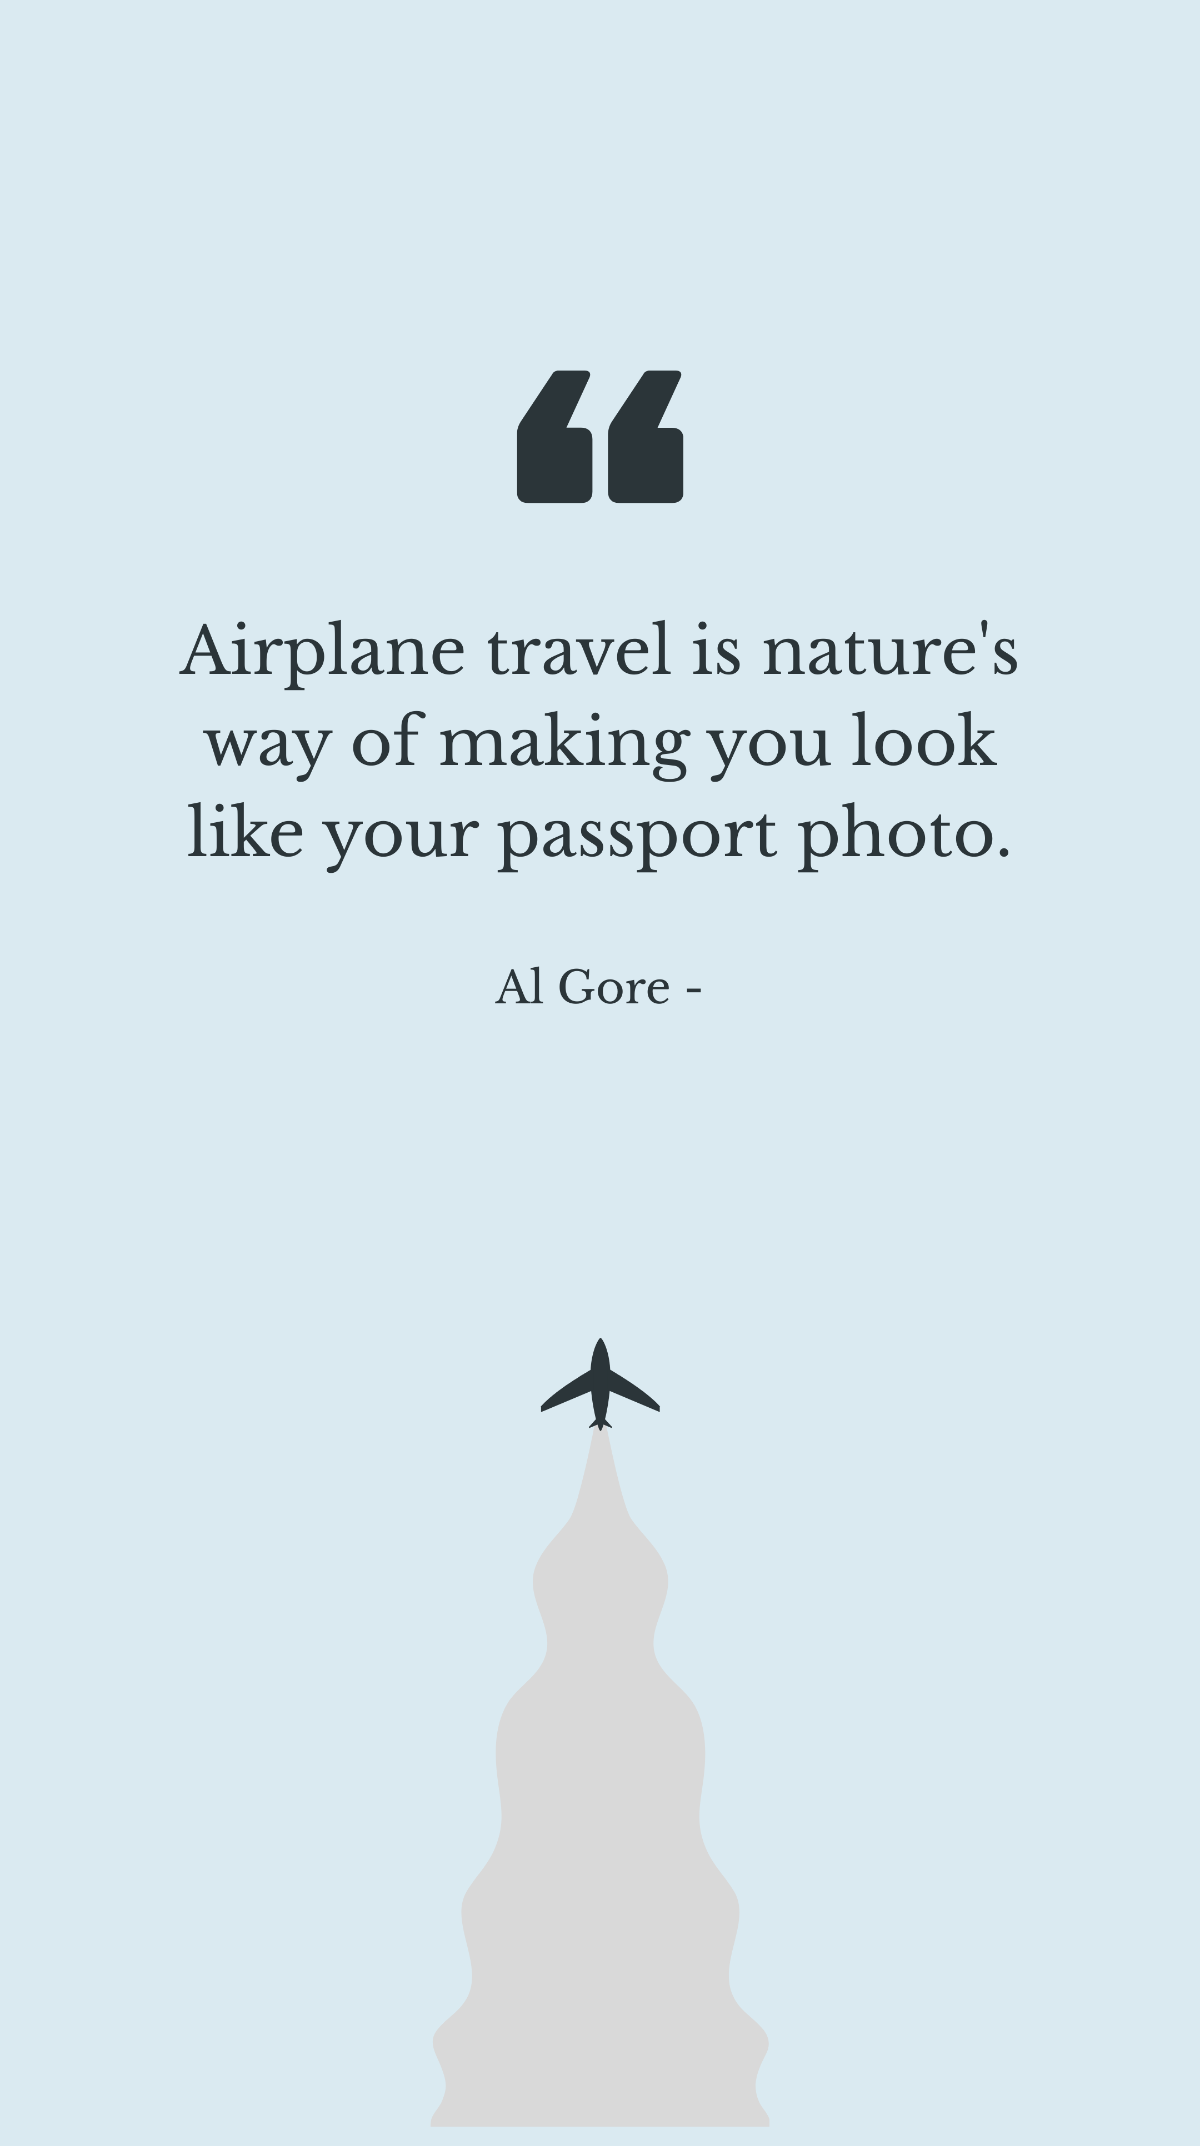 Al Gore - Airplane travel is nature's way of making you look like your passport photo.